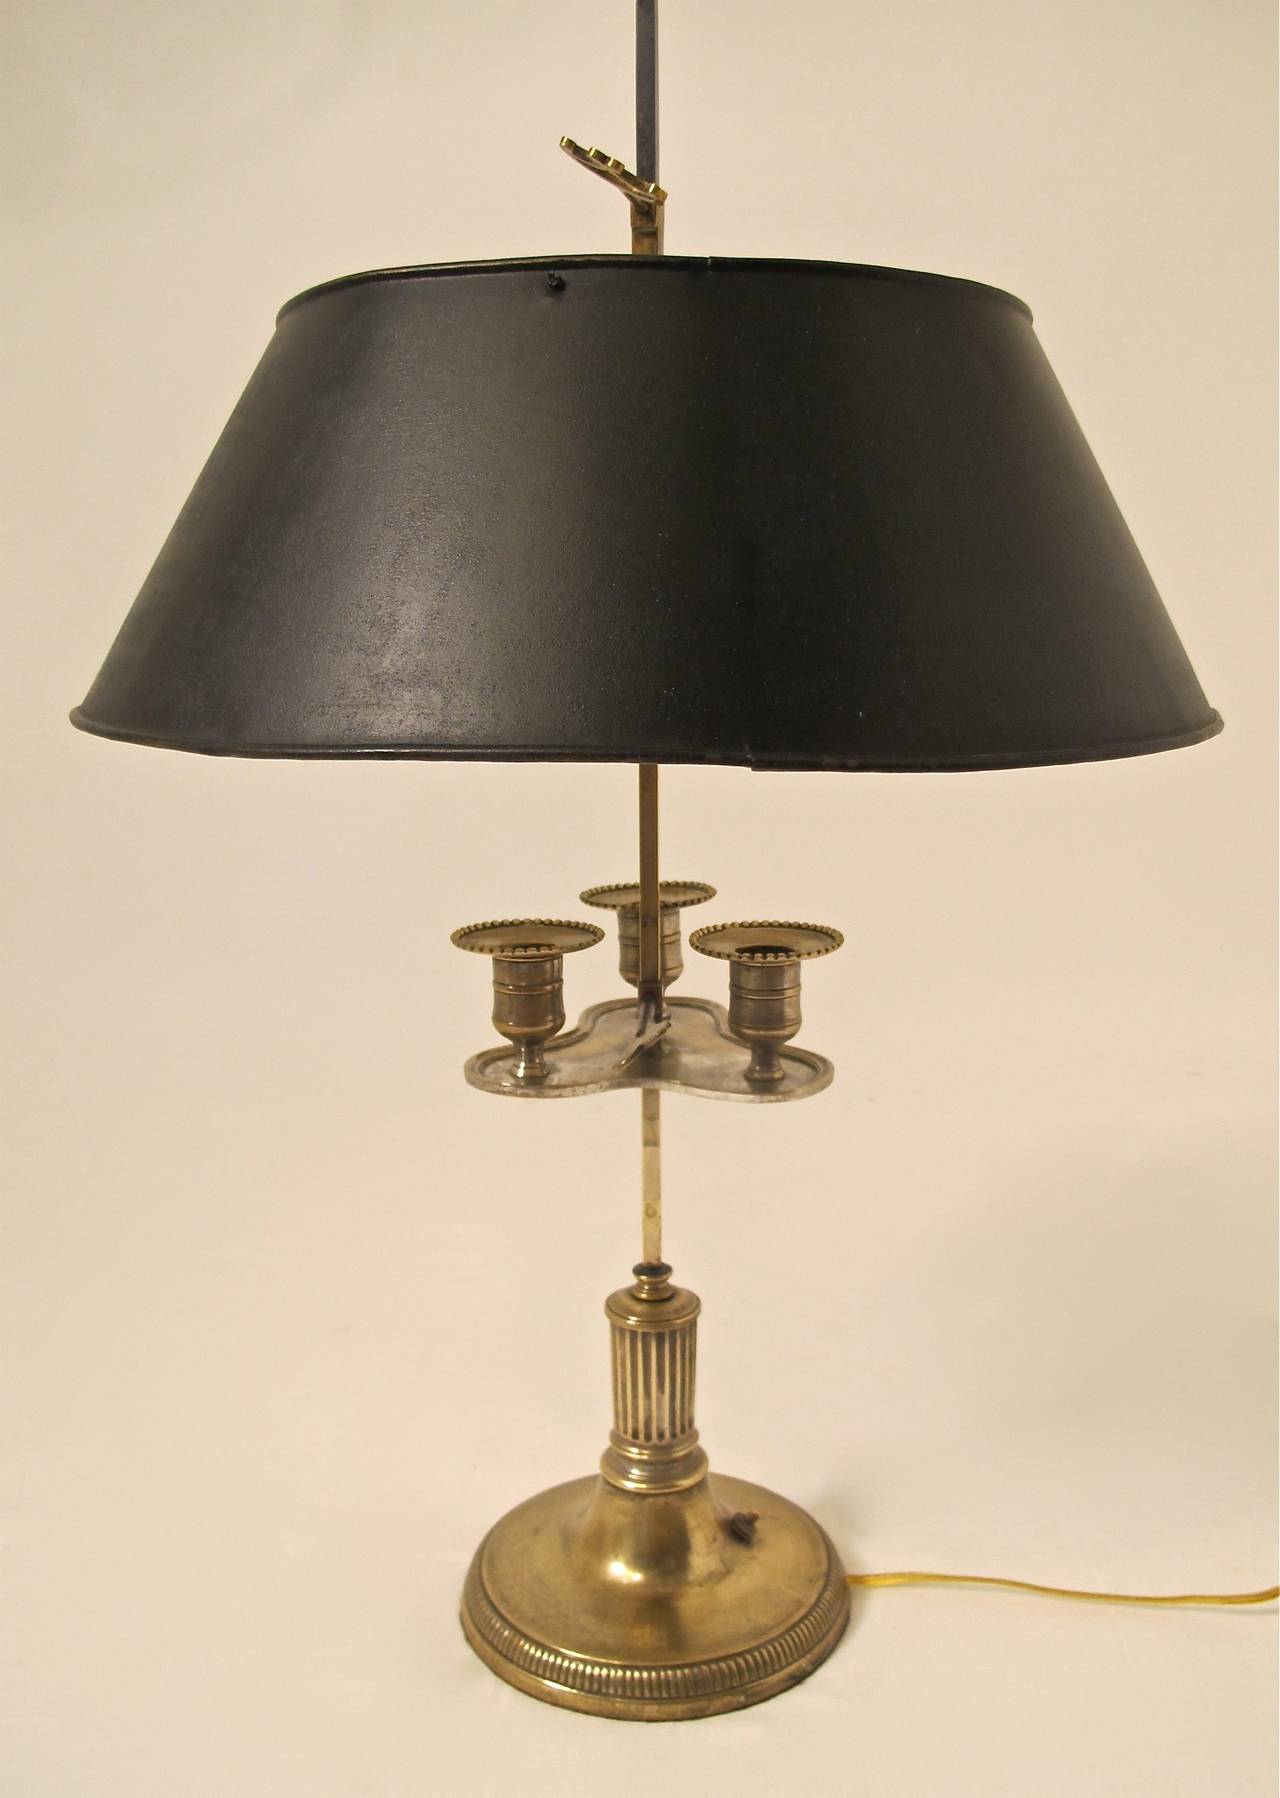 Early 19th century brass candle bouillotte lamp with remnants of silver plate, now converted to electric.